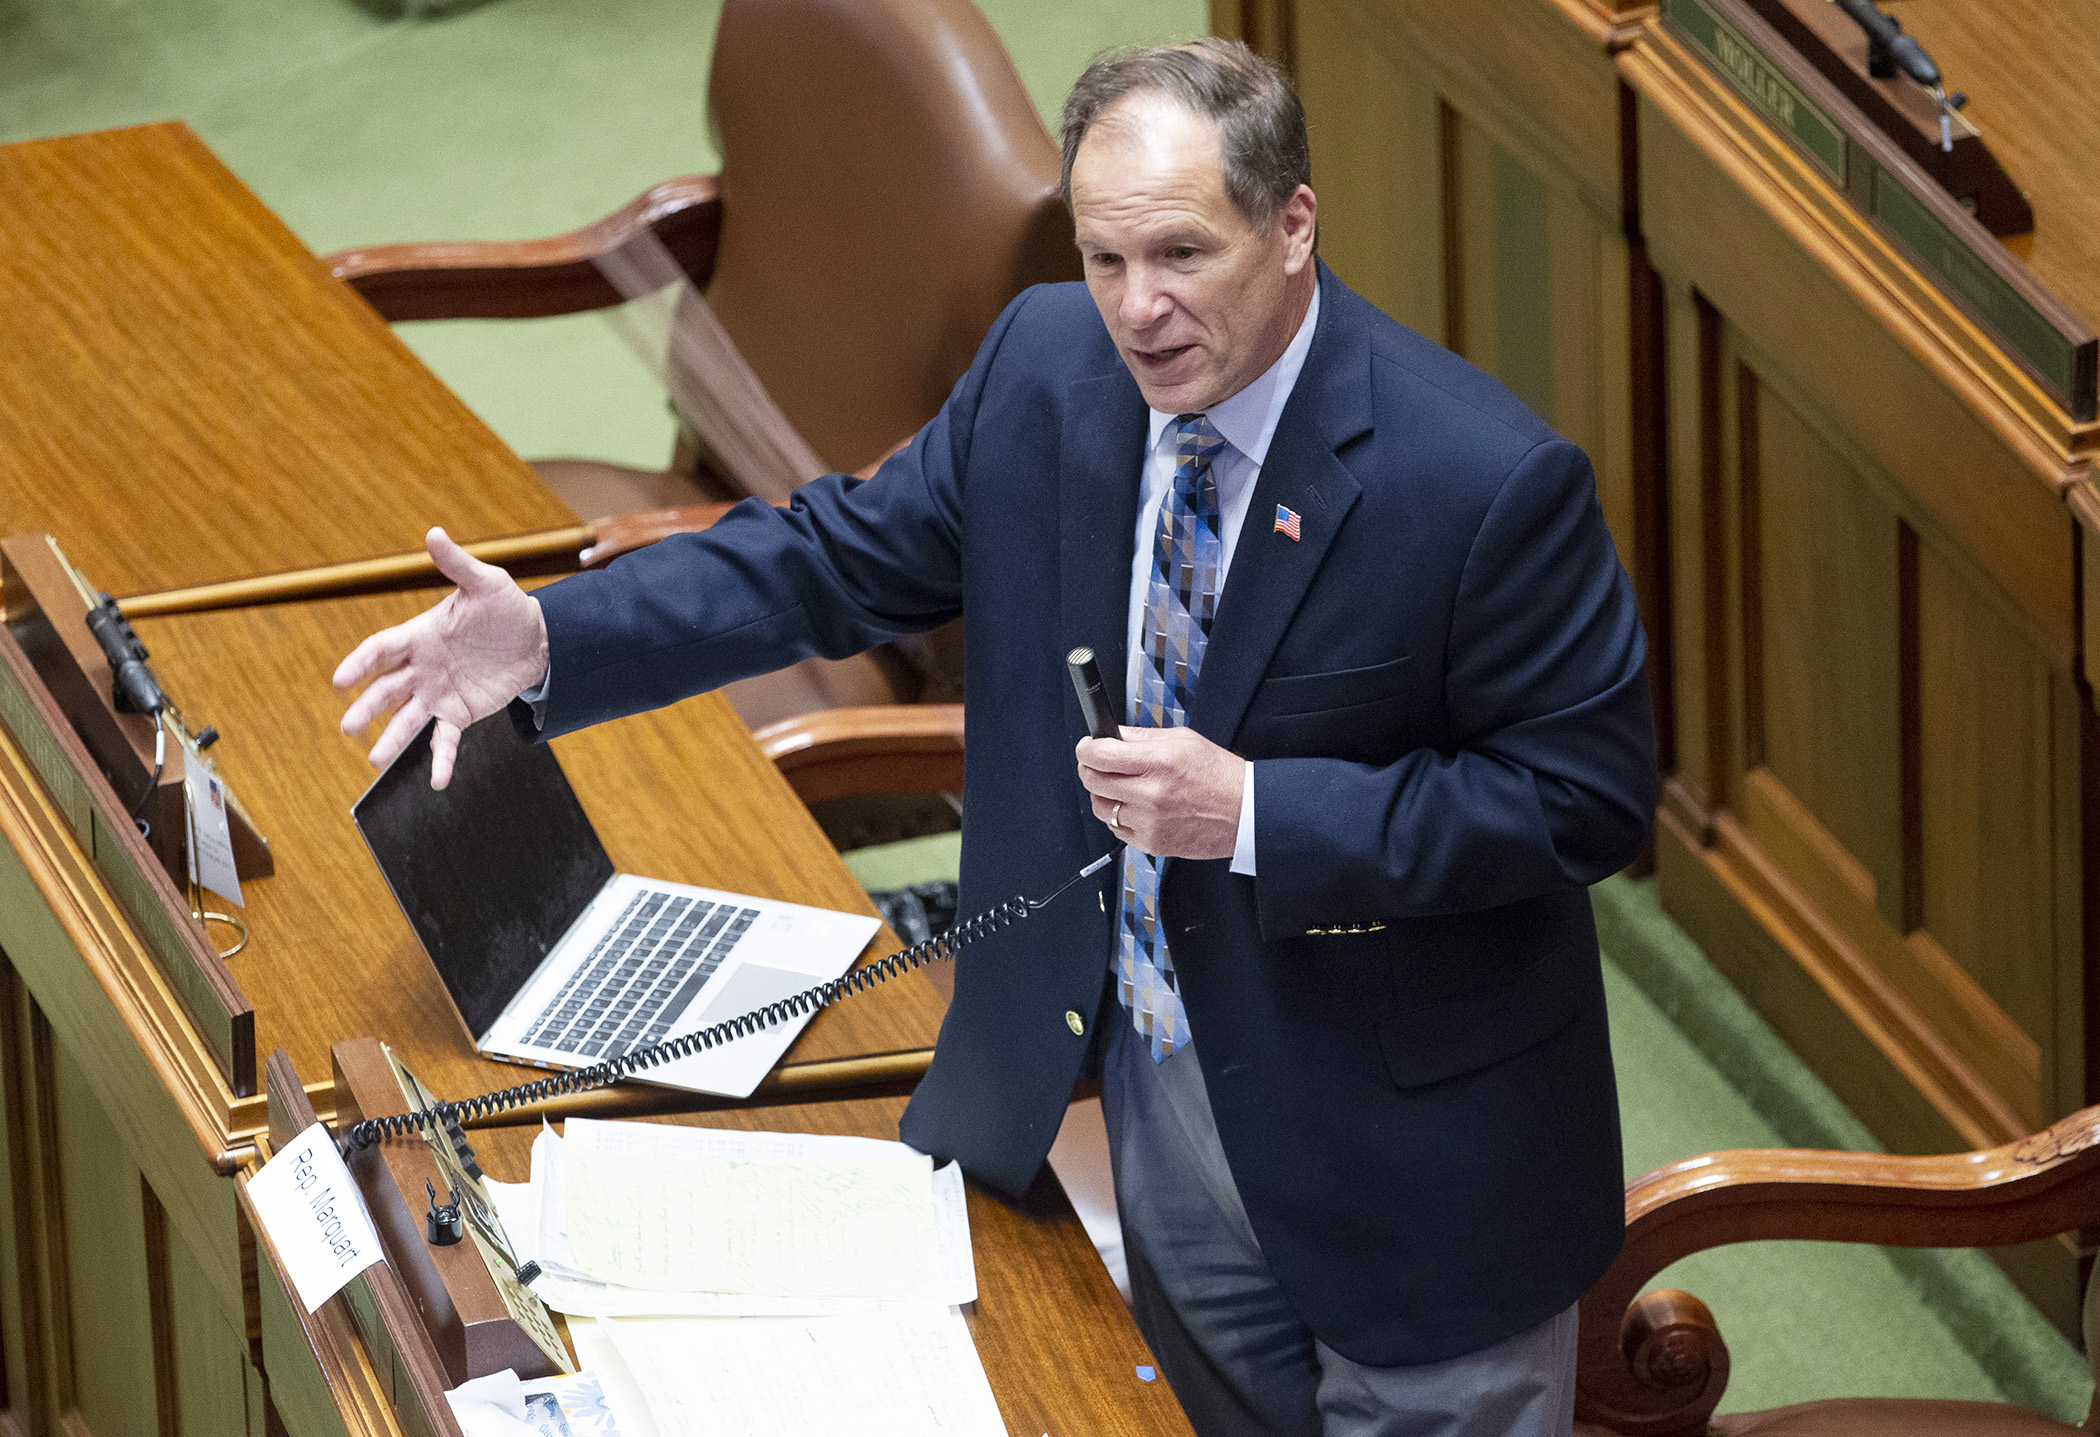 Rep. Paul Marquart speaks on the House Floor during a June 2020 special session. (House Photography file photo)